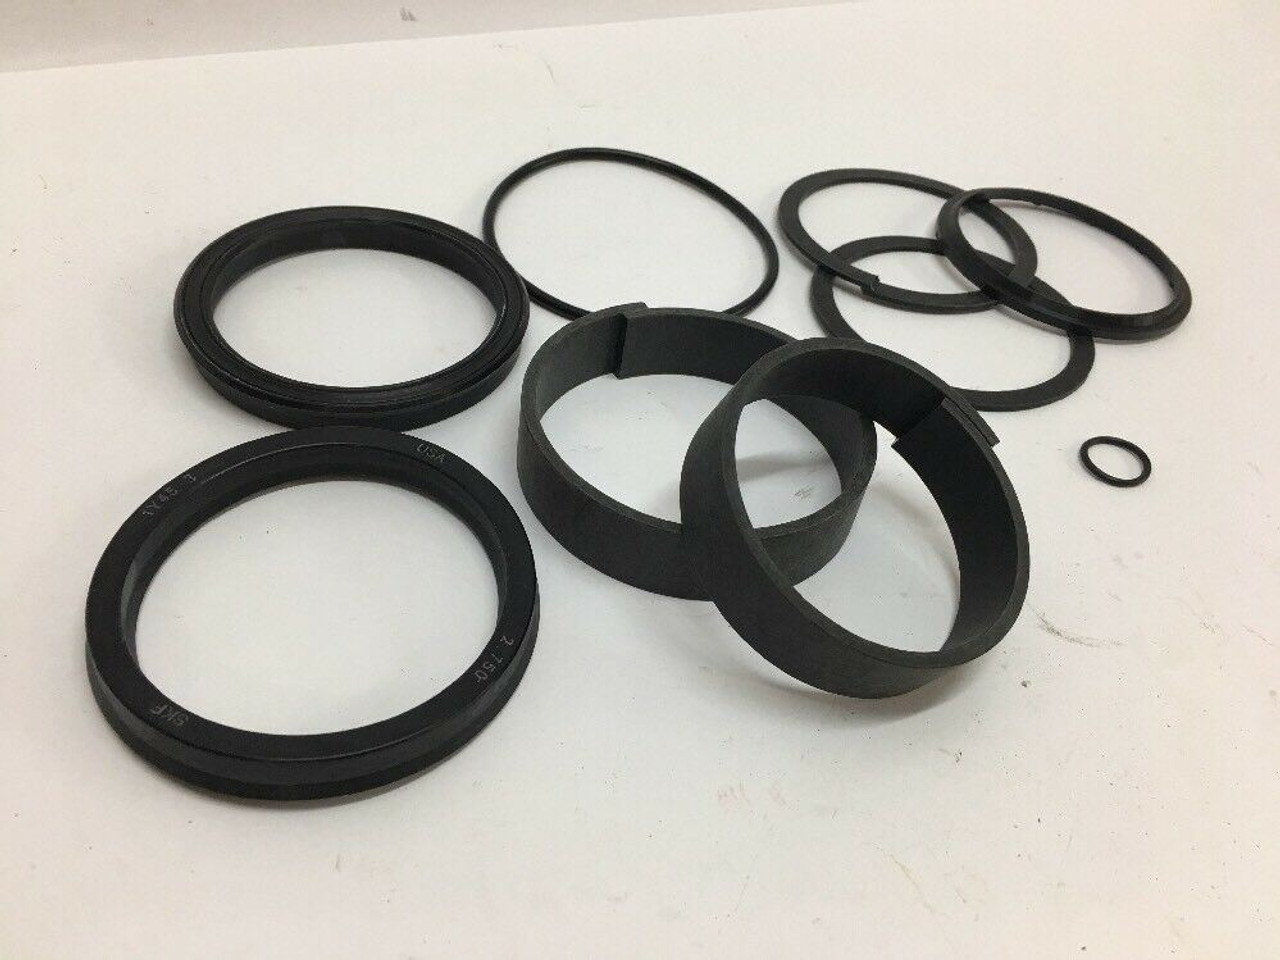 Linear Actuating Cylinder Seal Kit HY333840 Total Source